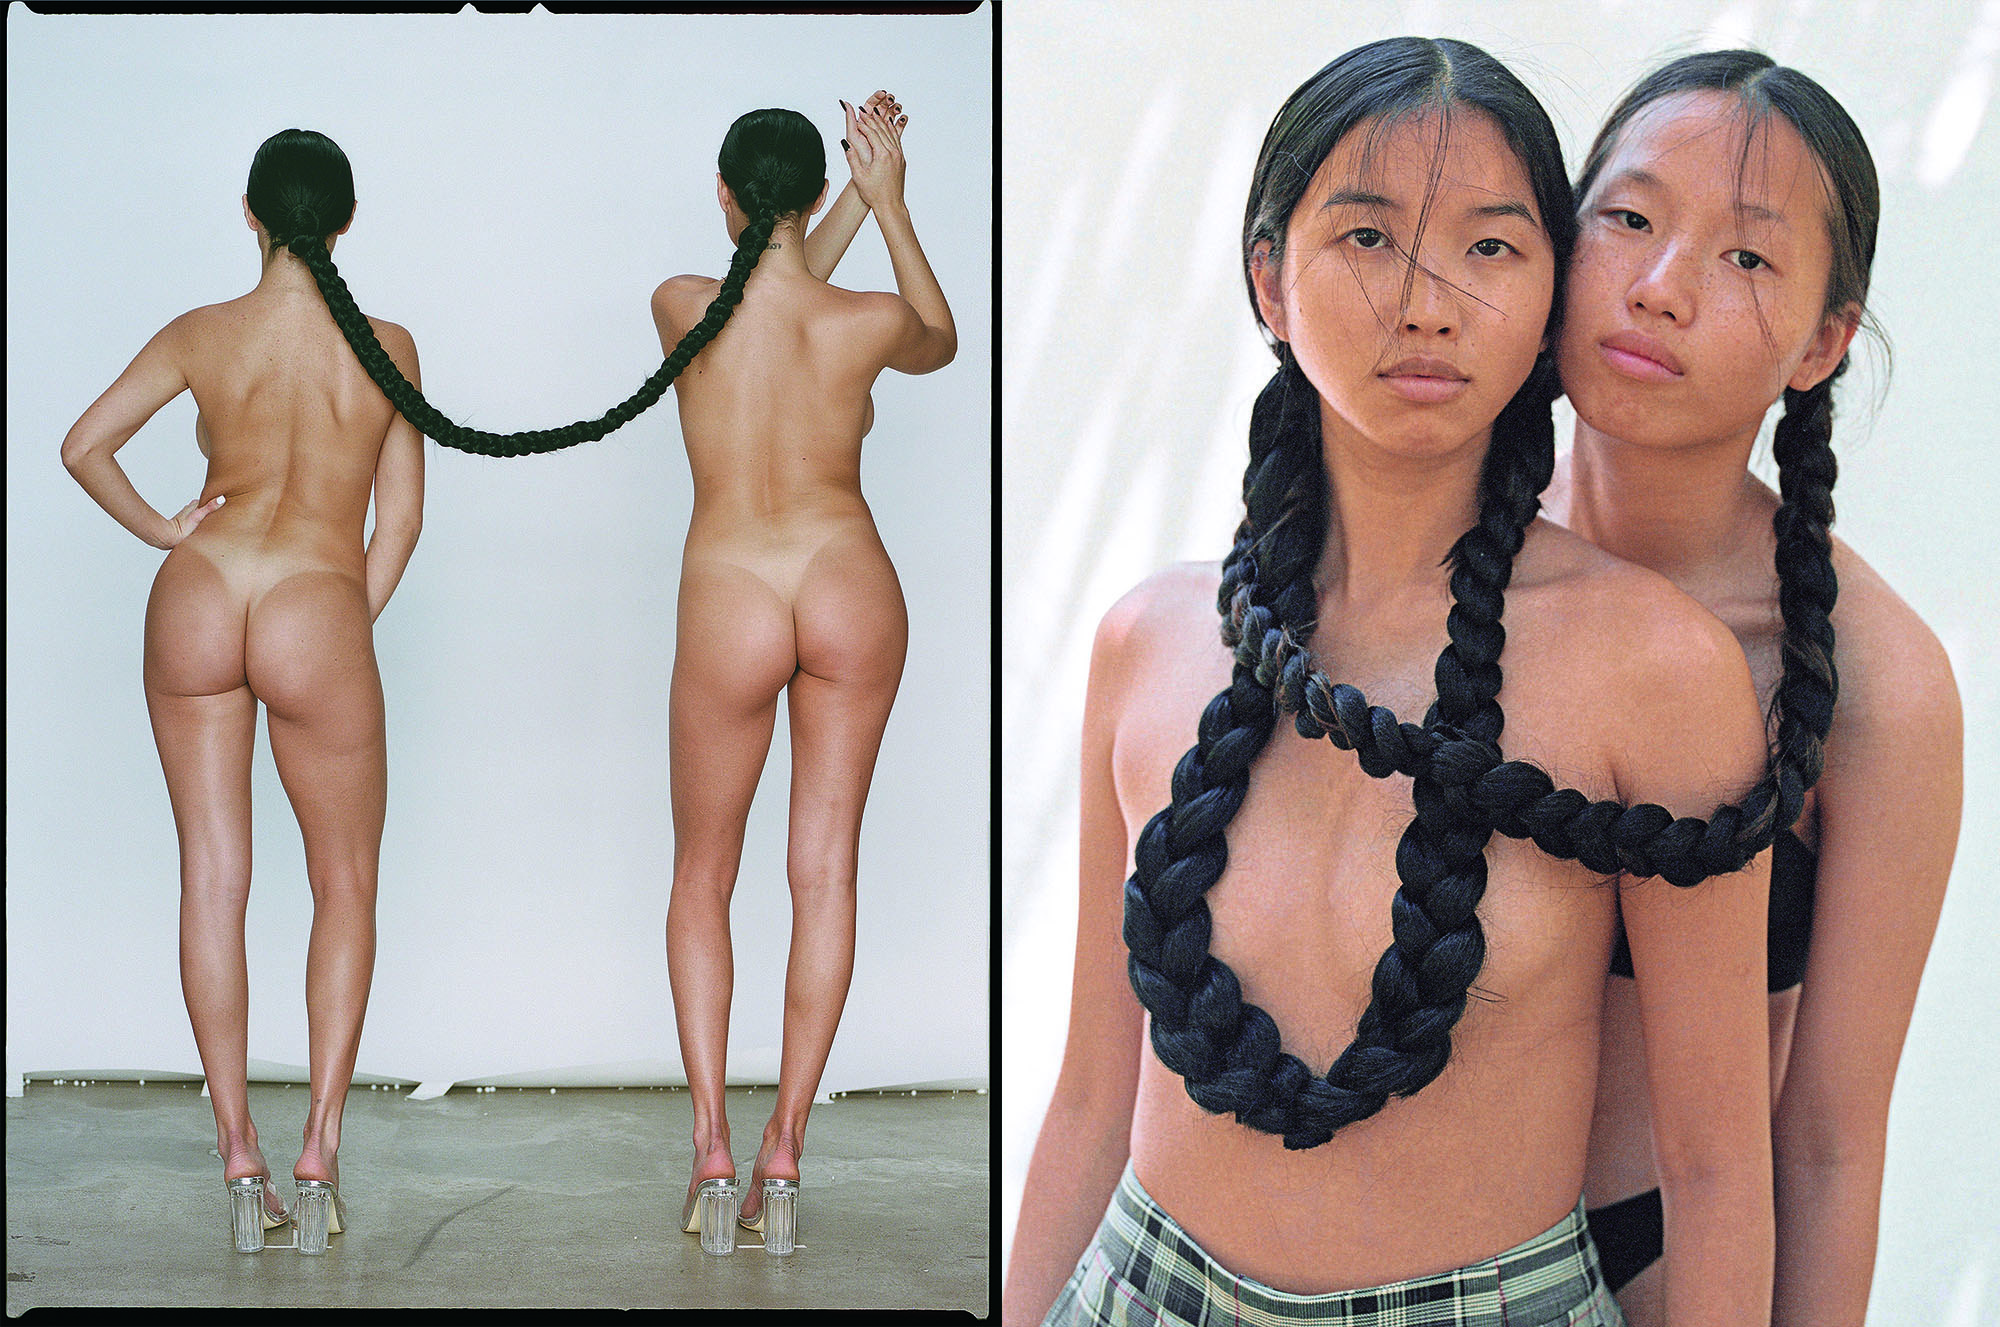 Two women standing naked with their backs to the camera, their braids intertwined